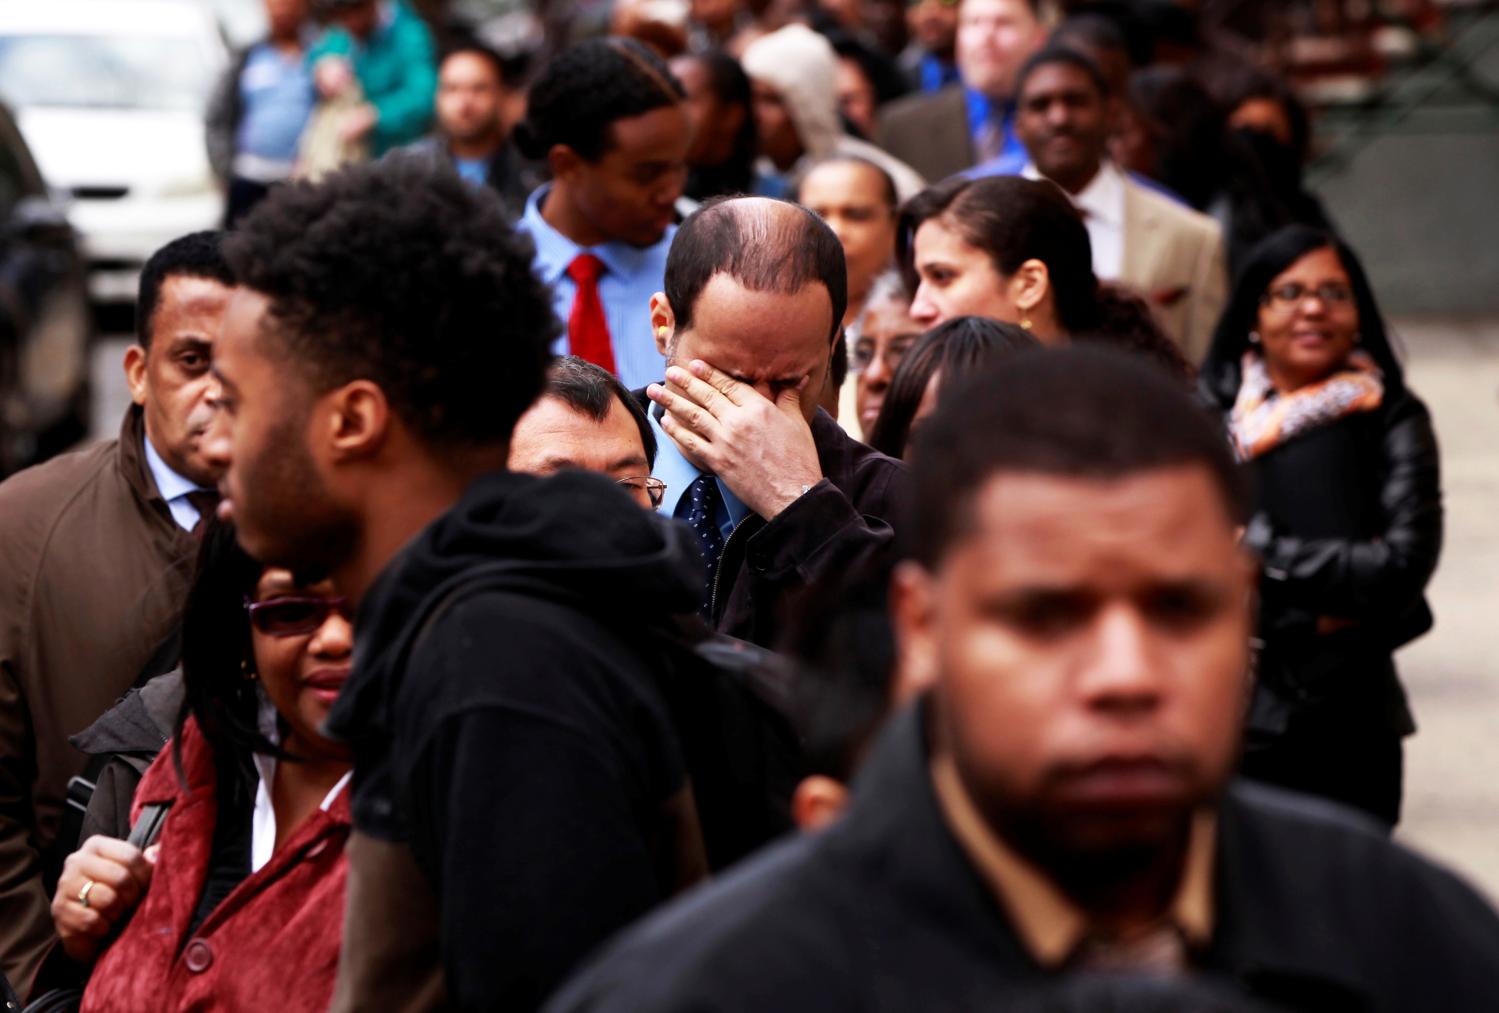 FILE PHOTO -- A man rubs his eyes as he waits in a line of jobseekers, to attend the Dr. Martin Luther King Jr. career fair held by the New York State department of Labor in New York April 12, 2012. REUTERS/Lucas Jackson/File Photo - RTX2NWJ6